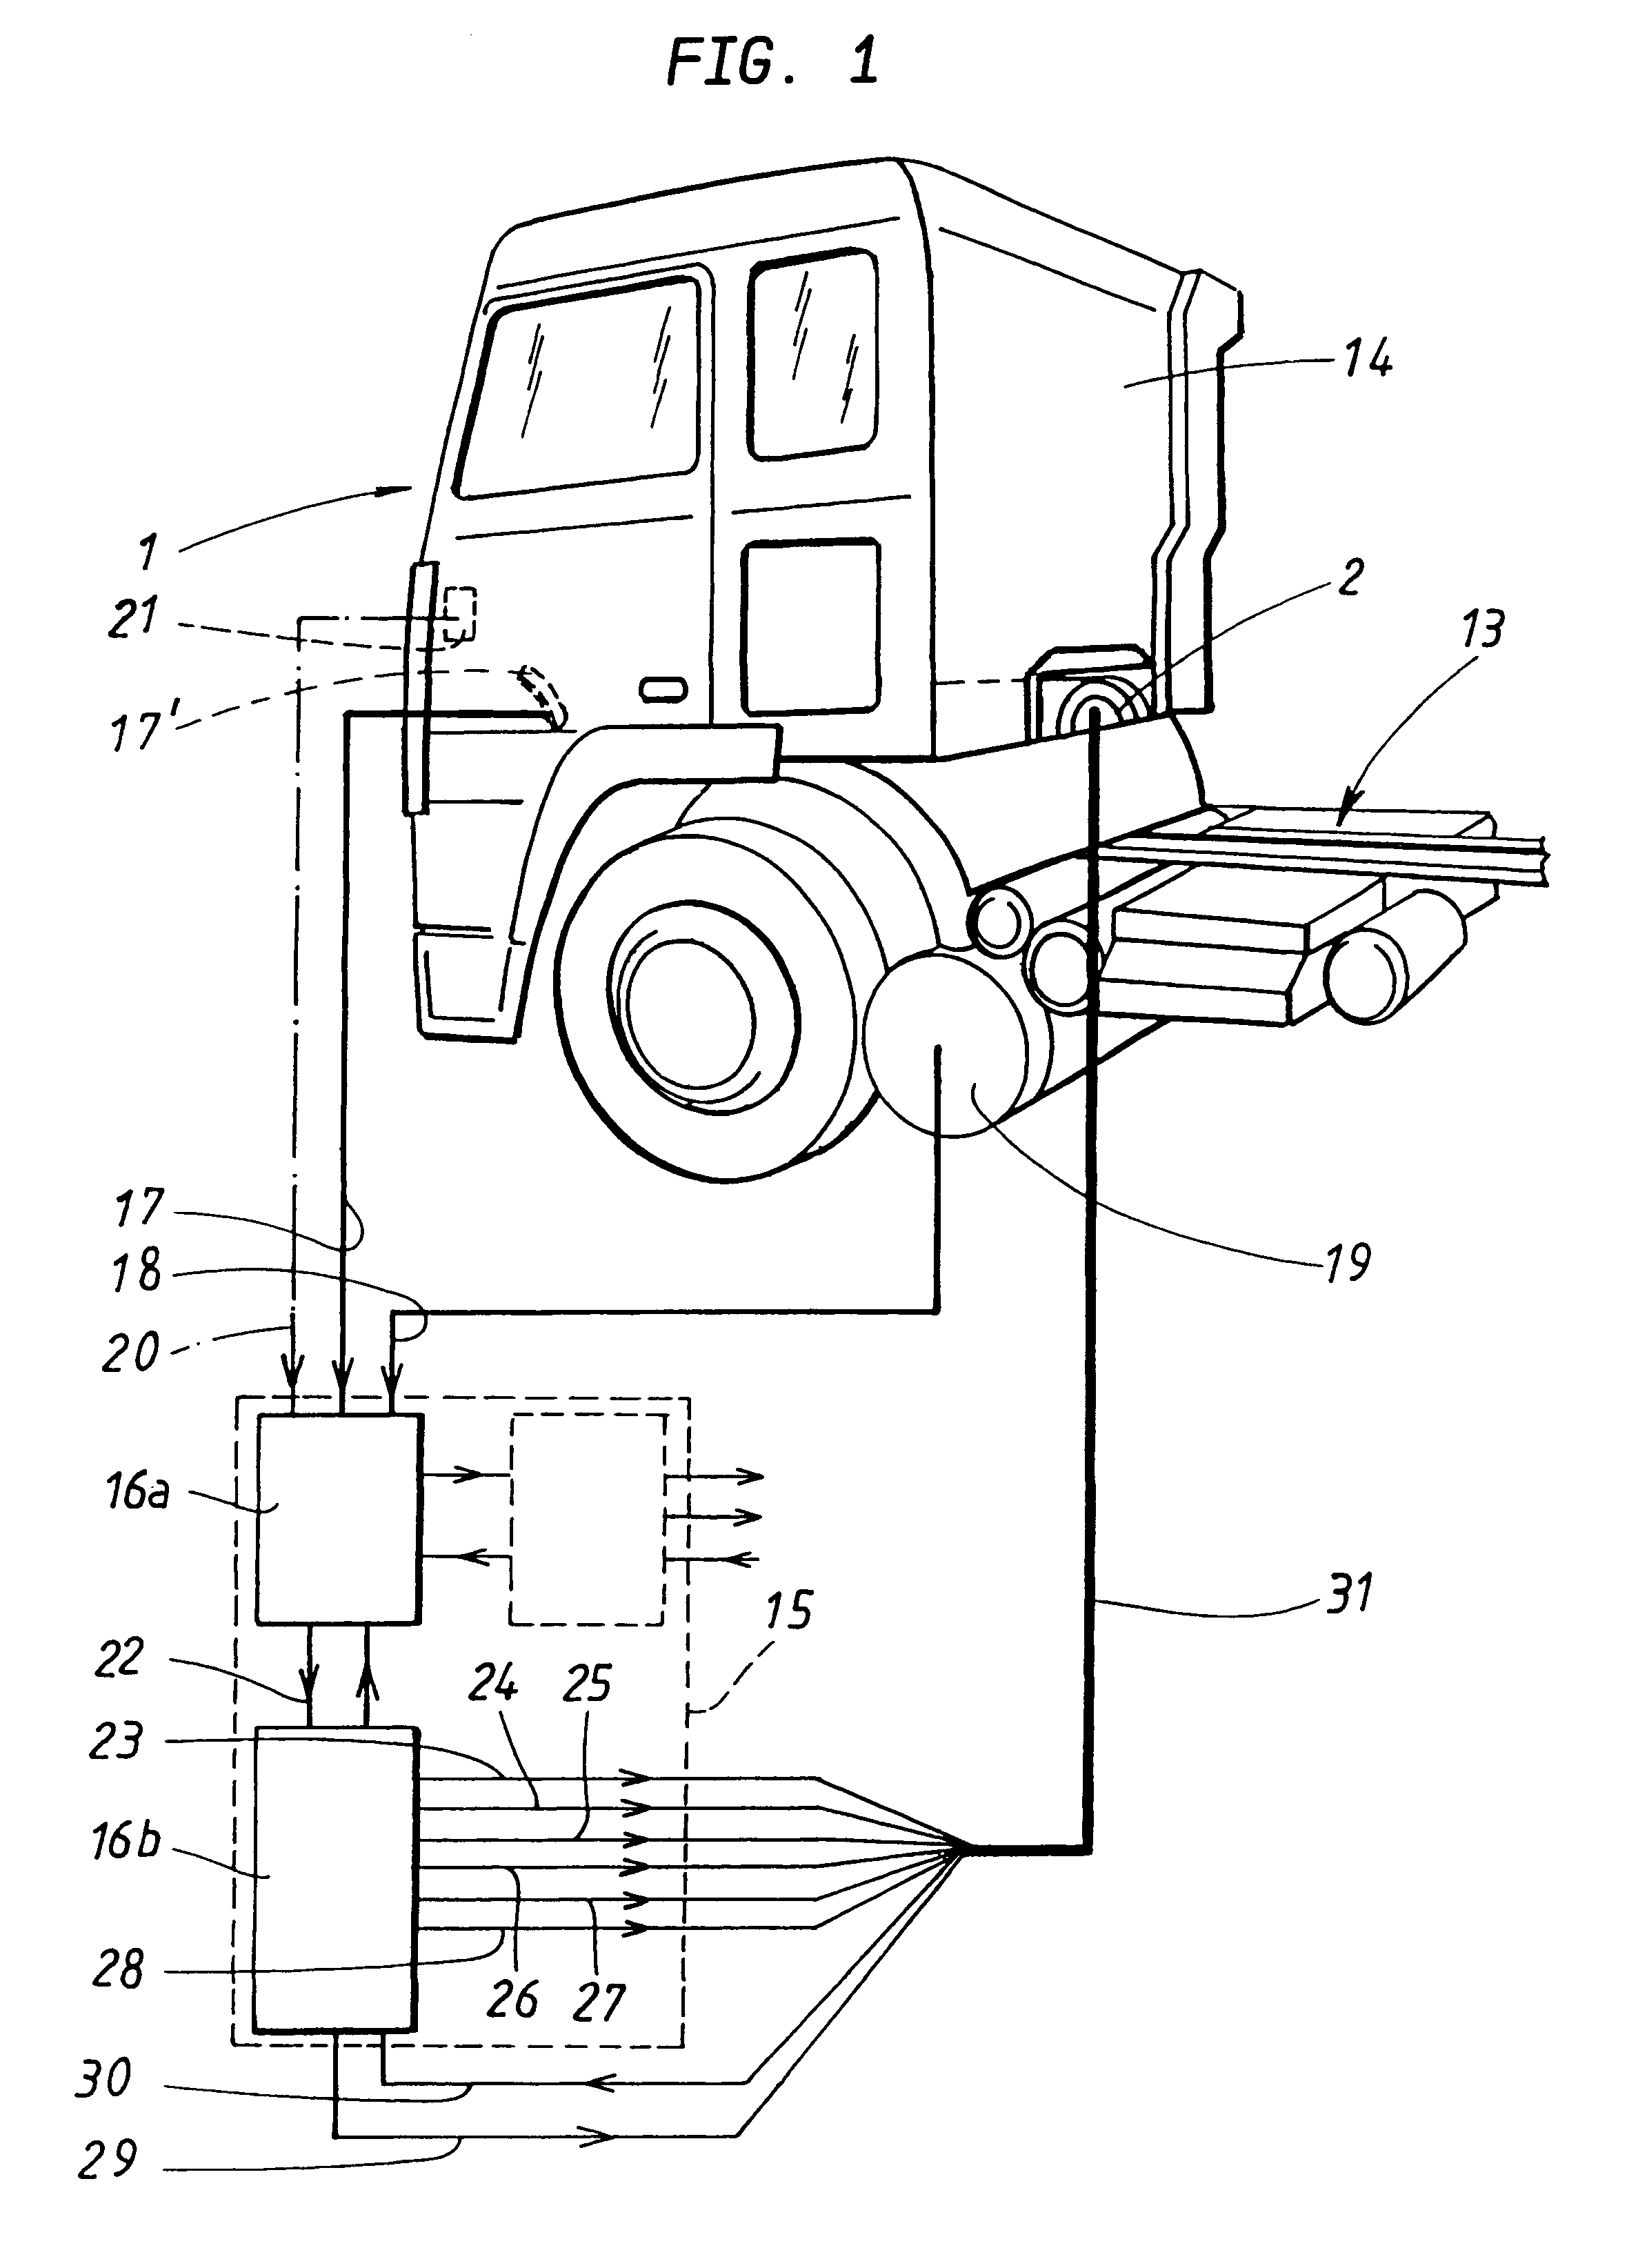 Method for reducing vibration in a vehicle and a device for accomplishment of the method